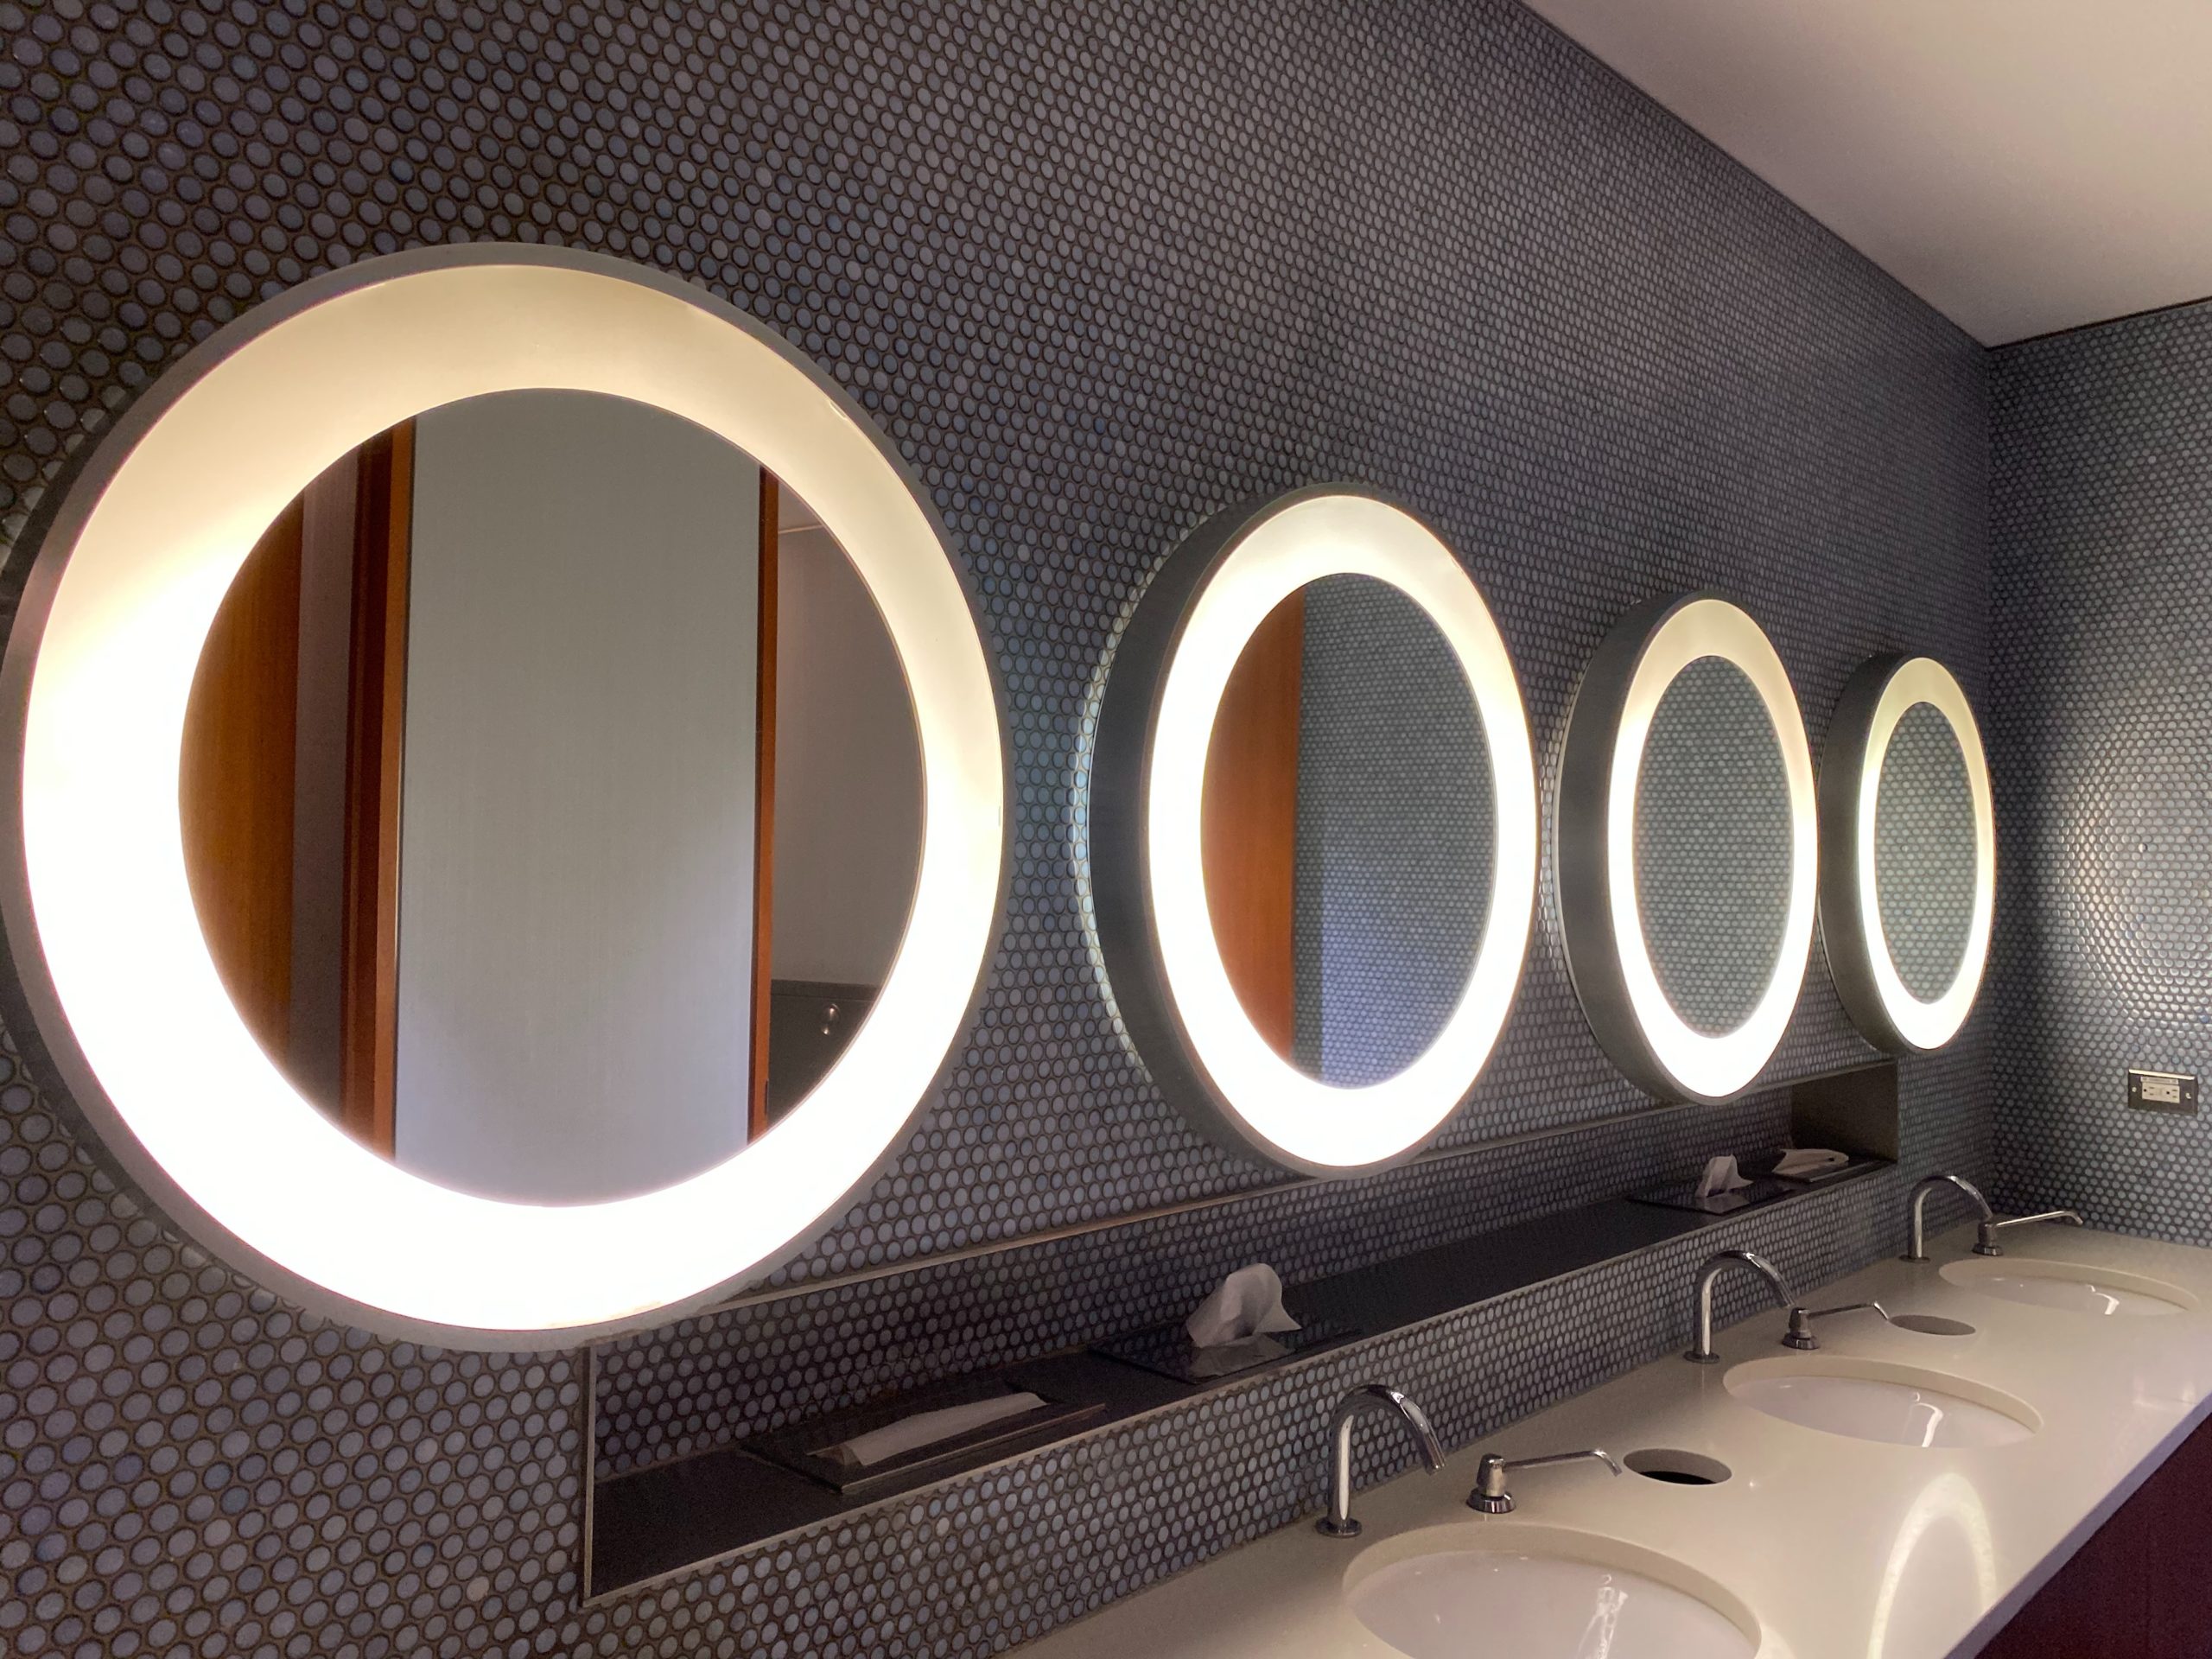 A clean and sophisticated bathroom with mirrors and sinks